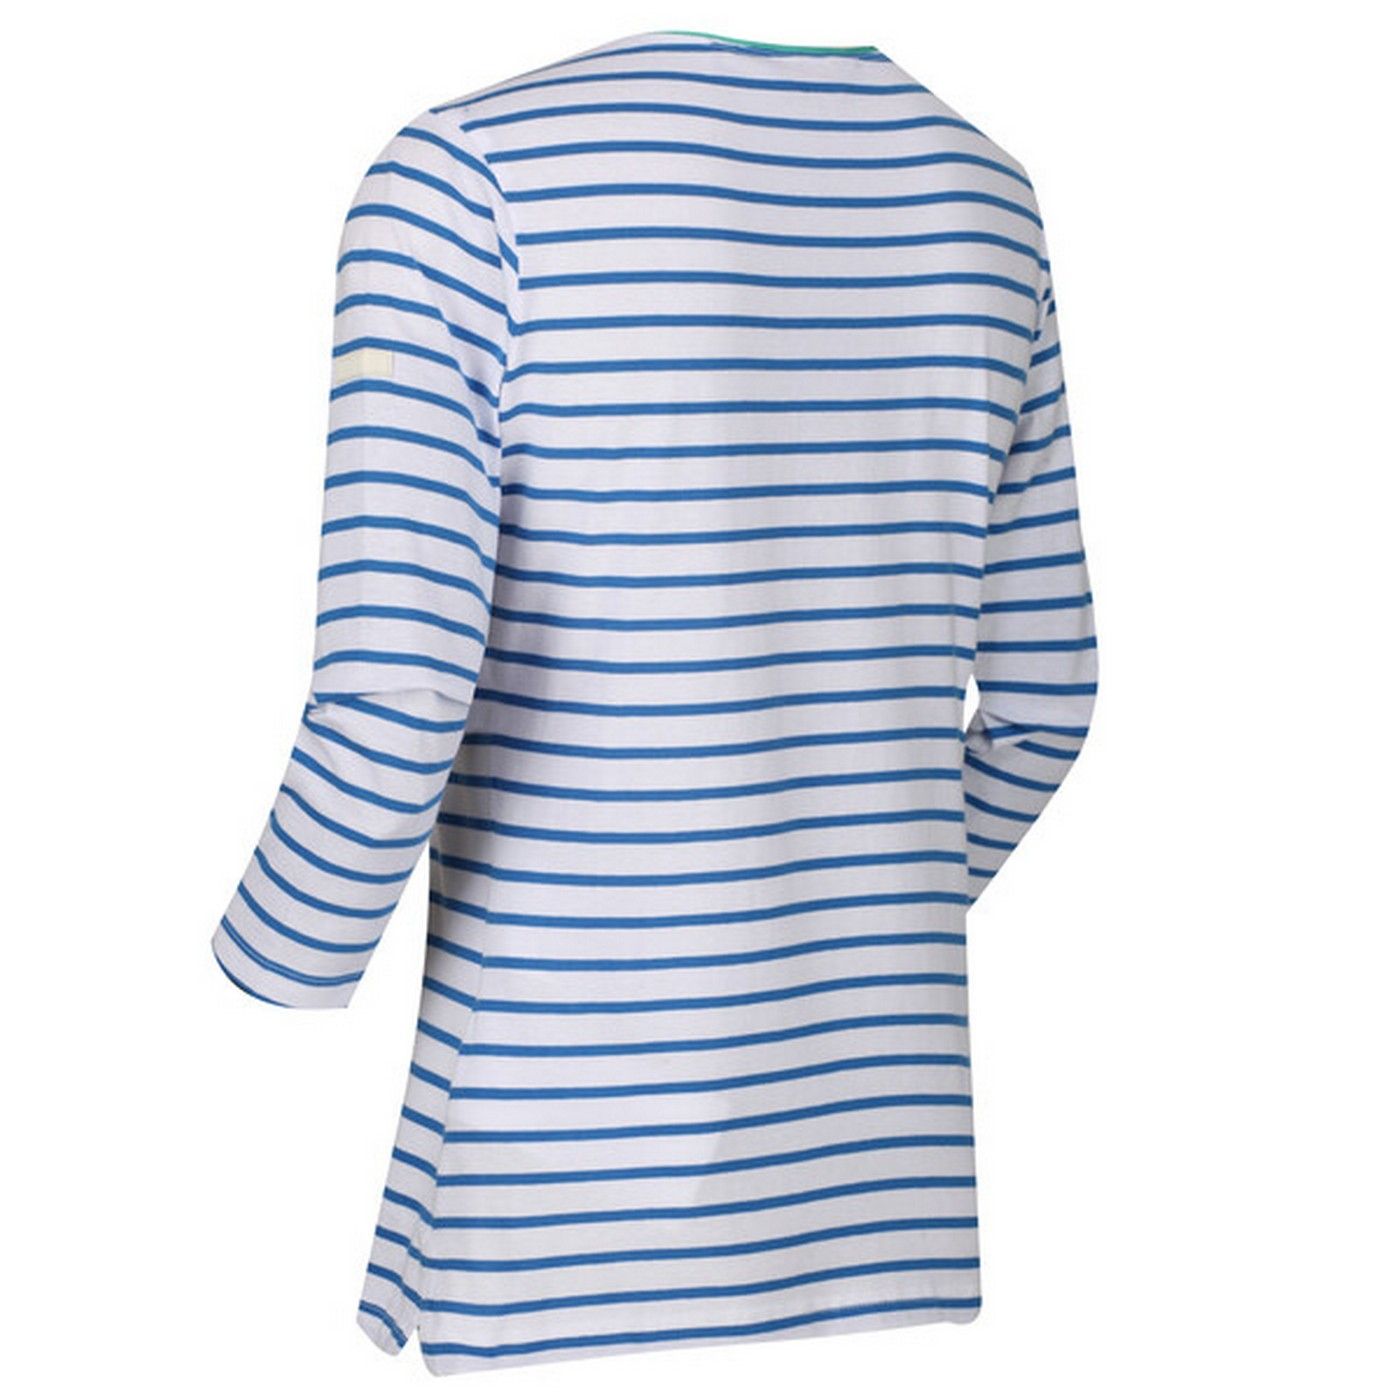 100% Cotton. Fabric: Coolweave, Jersey. 160gsm. Design: Patterned. Neckline: Boat Neck. Sleeve-Type: Long-Sleeved. Breathable, Button Detail, Curved Hem, Lightweight.